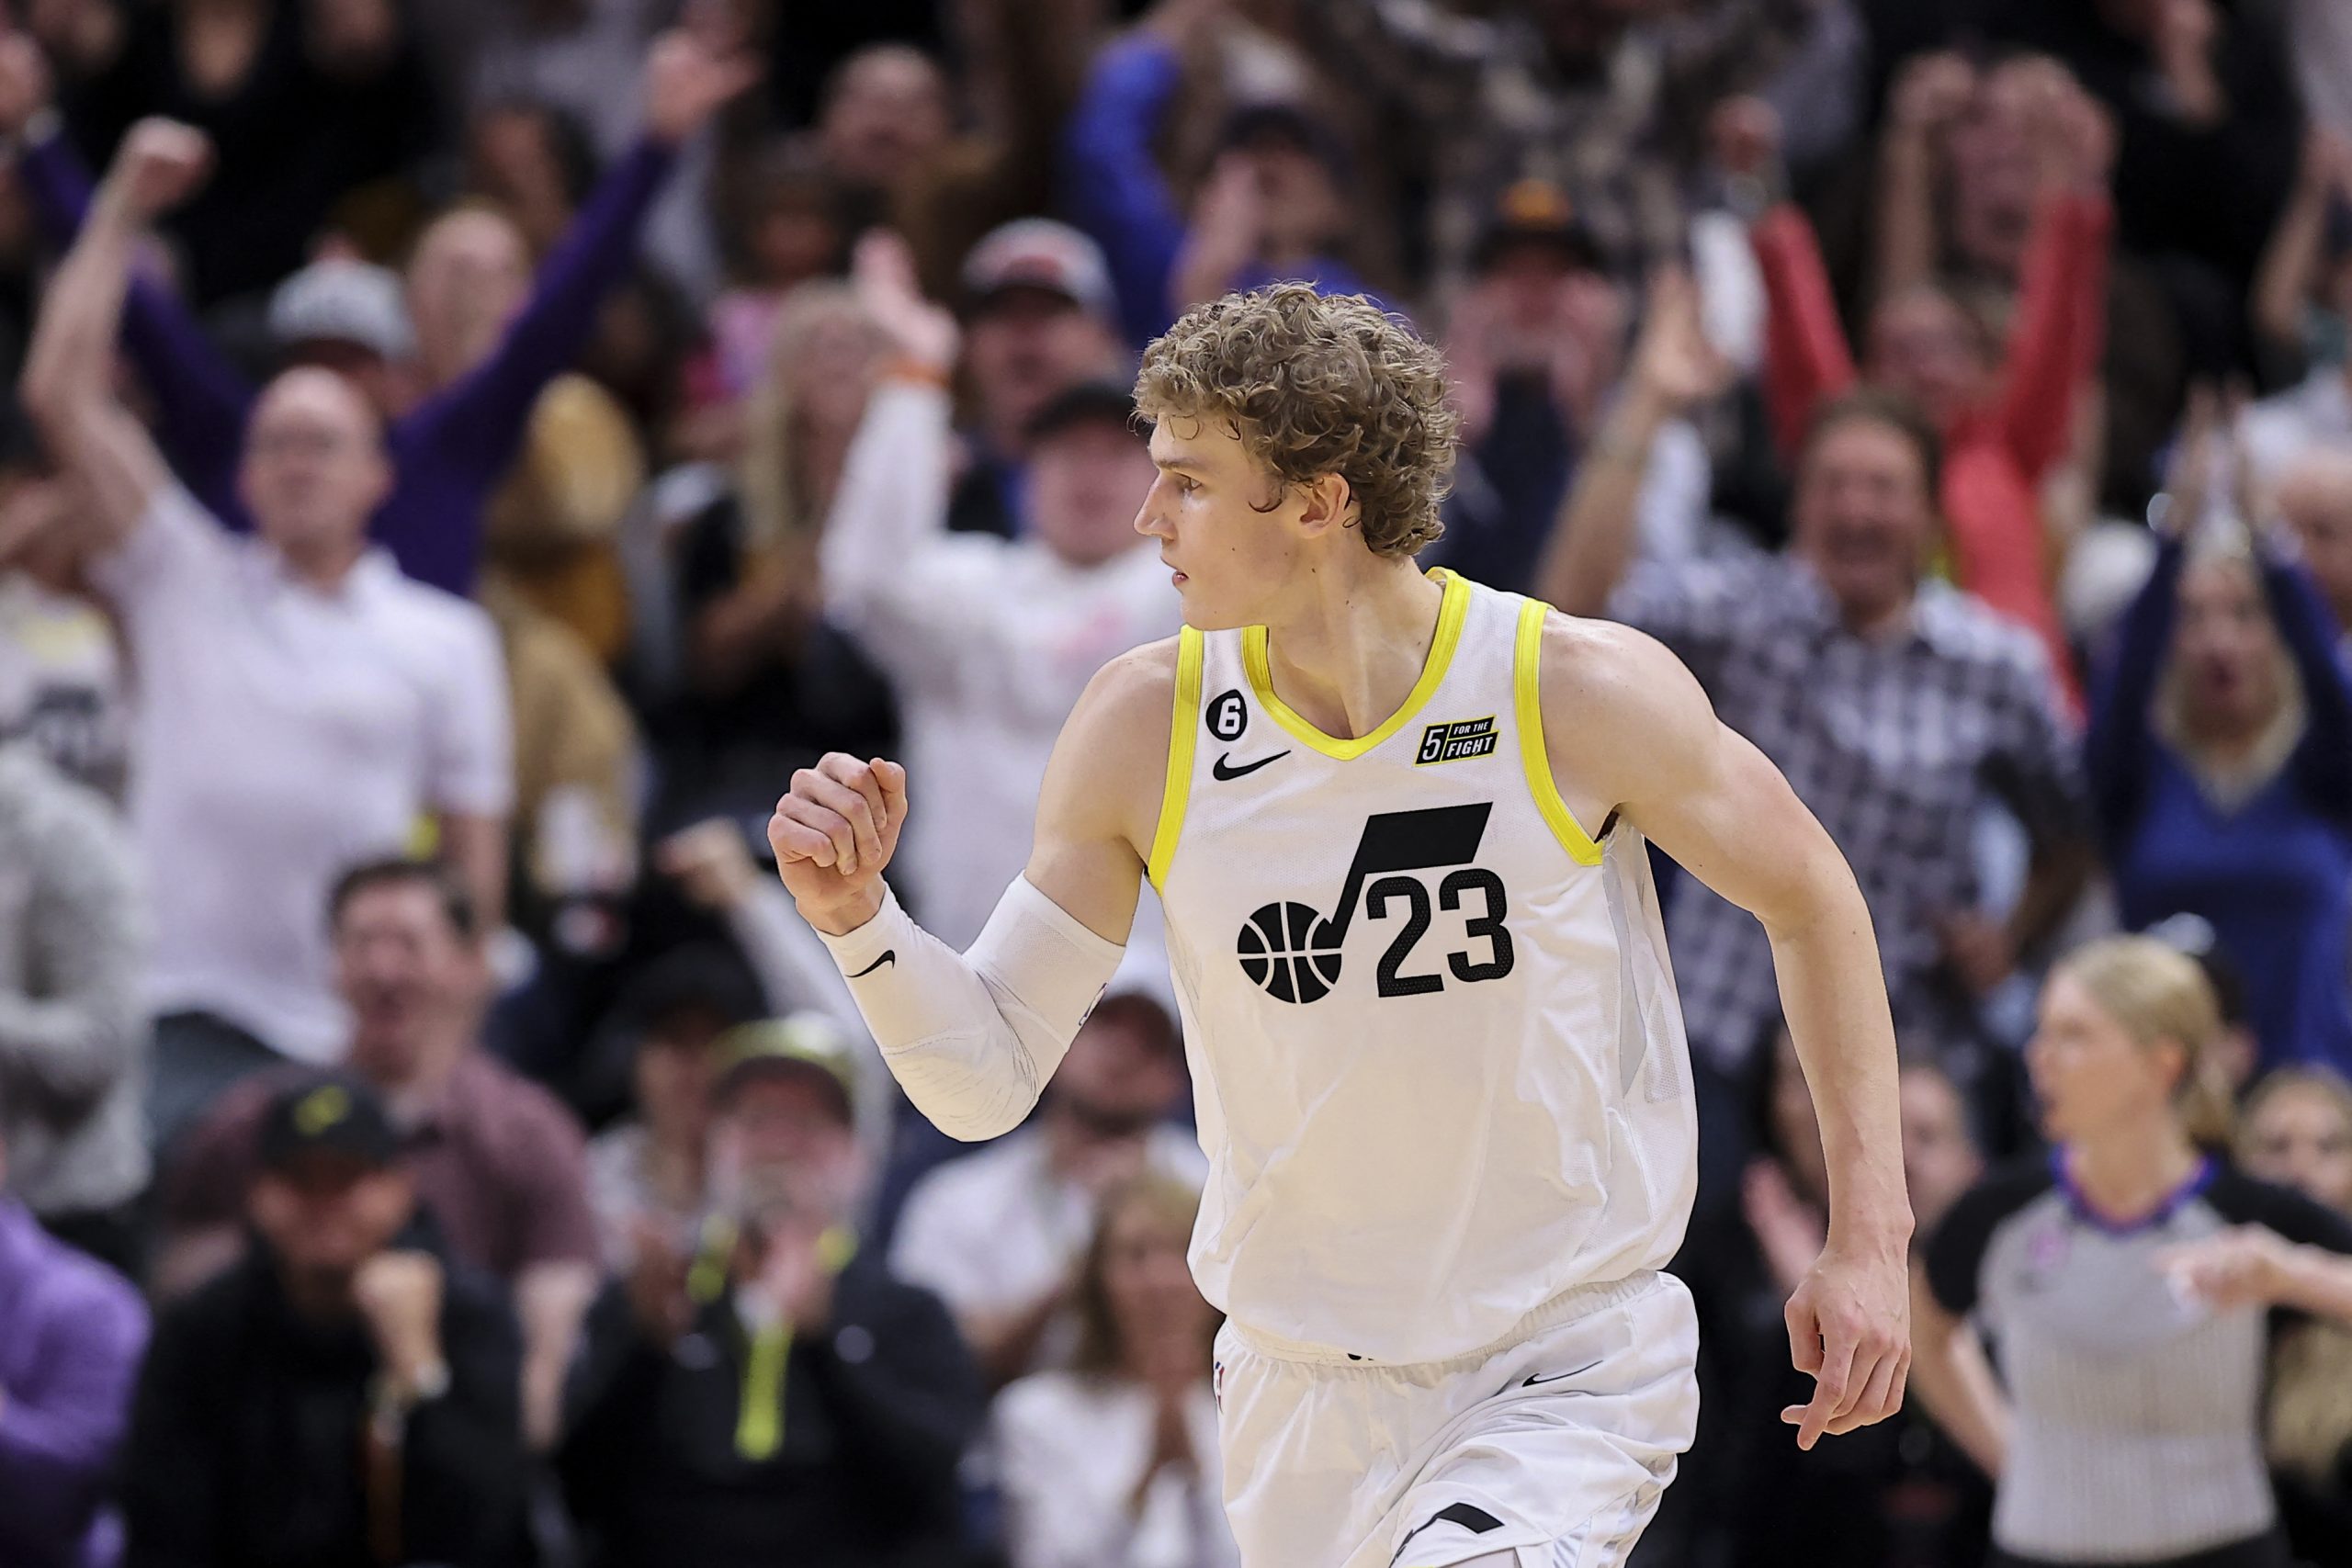 Oct 29, 2022; Salt Lake City, Utah, USA; Utah Jazz forward Lauri Markkanen (23) reacts to making a three point shot against the Memphis Grizzlies in the fourth quarter at Vivint Arena. Mandatory Credit: Rob Gray-USA TODAY Sports